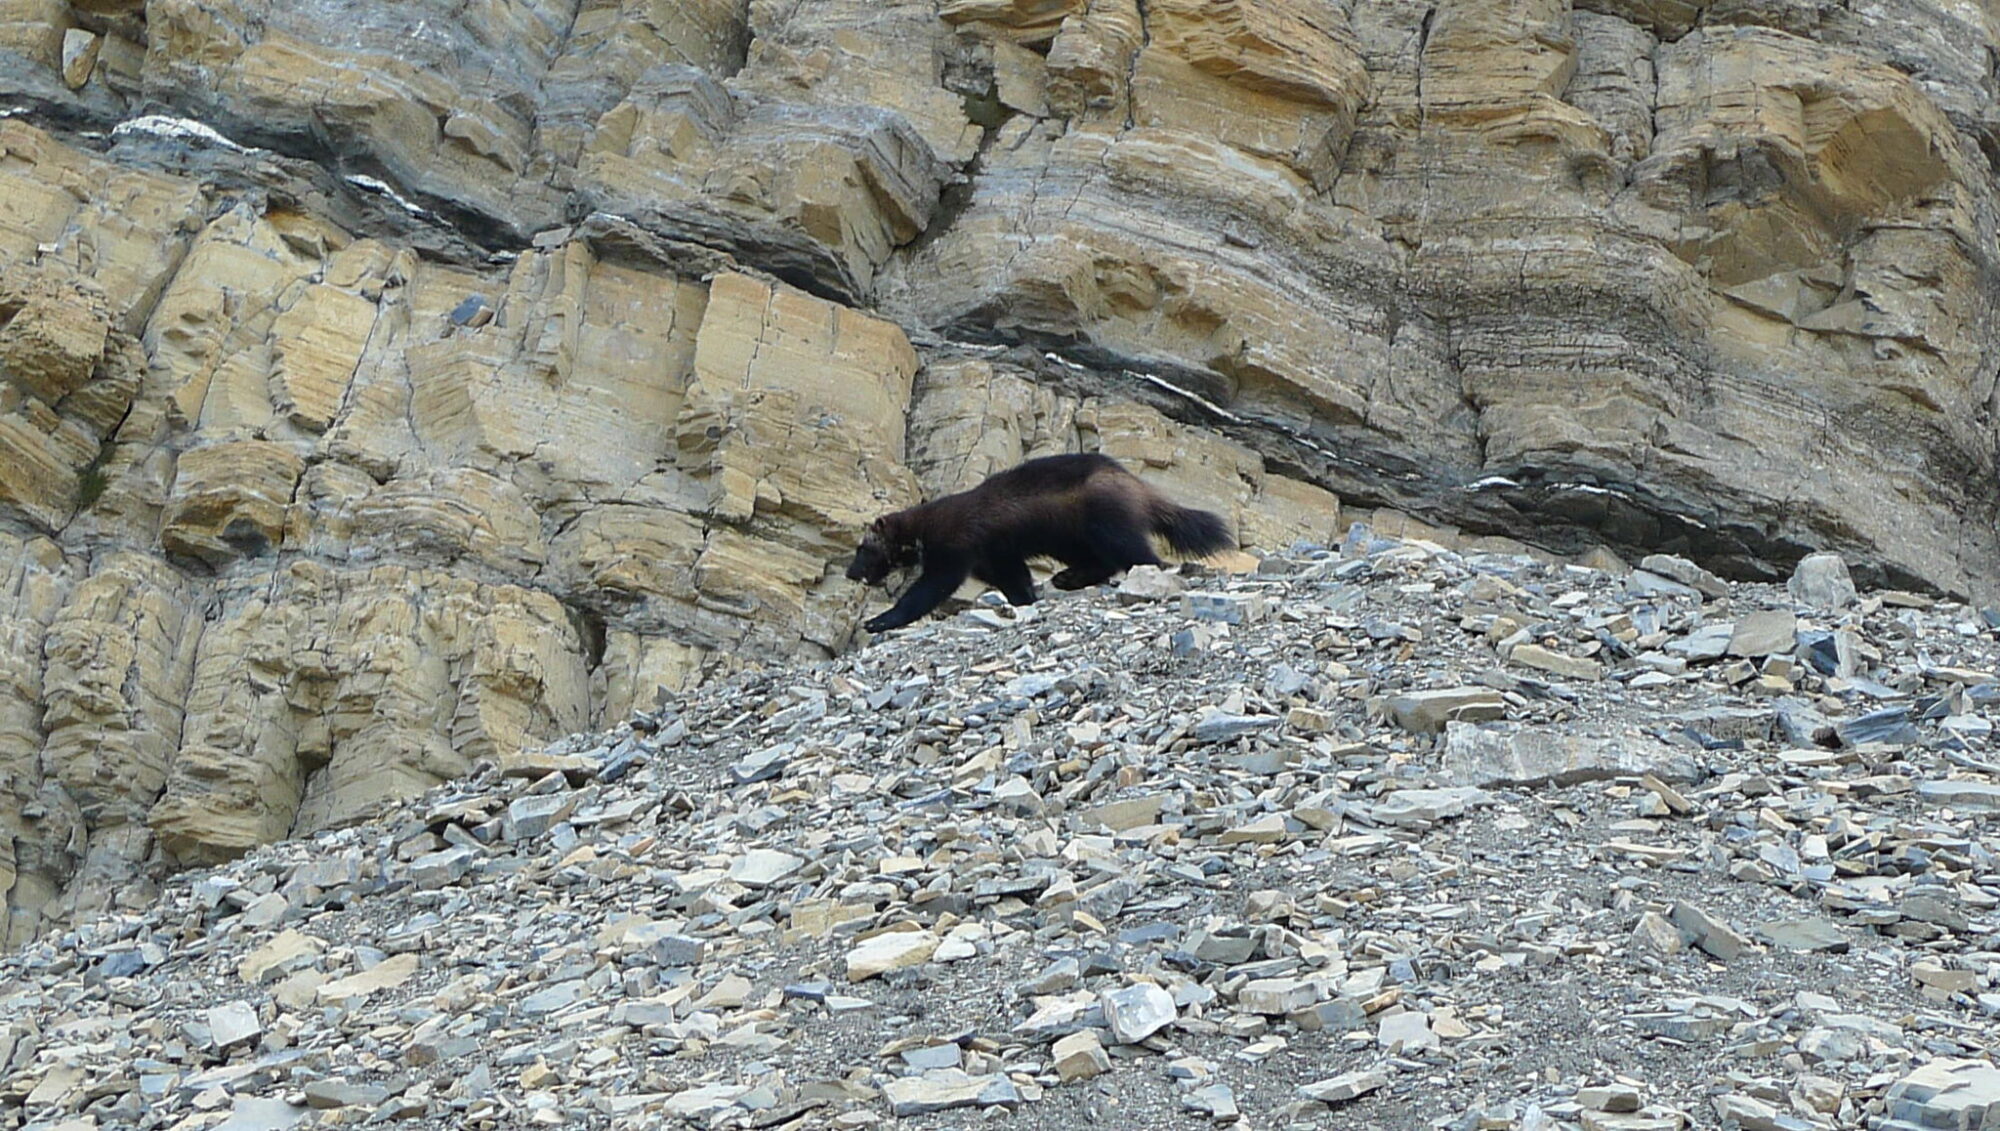 A wolverine crosses a scree slope. Wolverines can live at high altitdues.